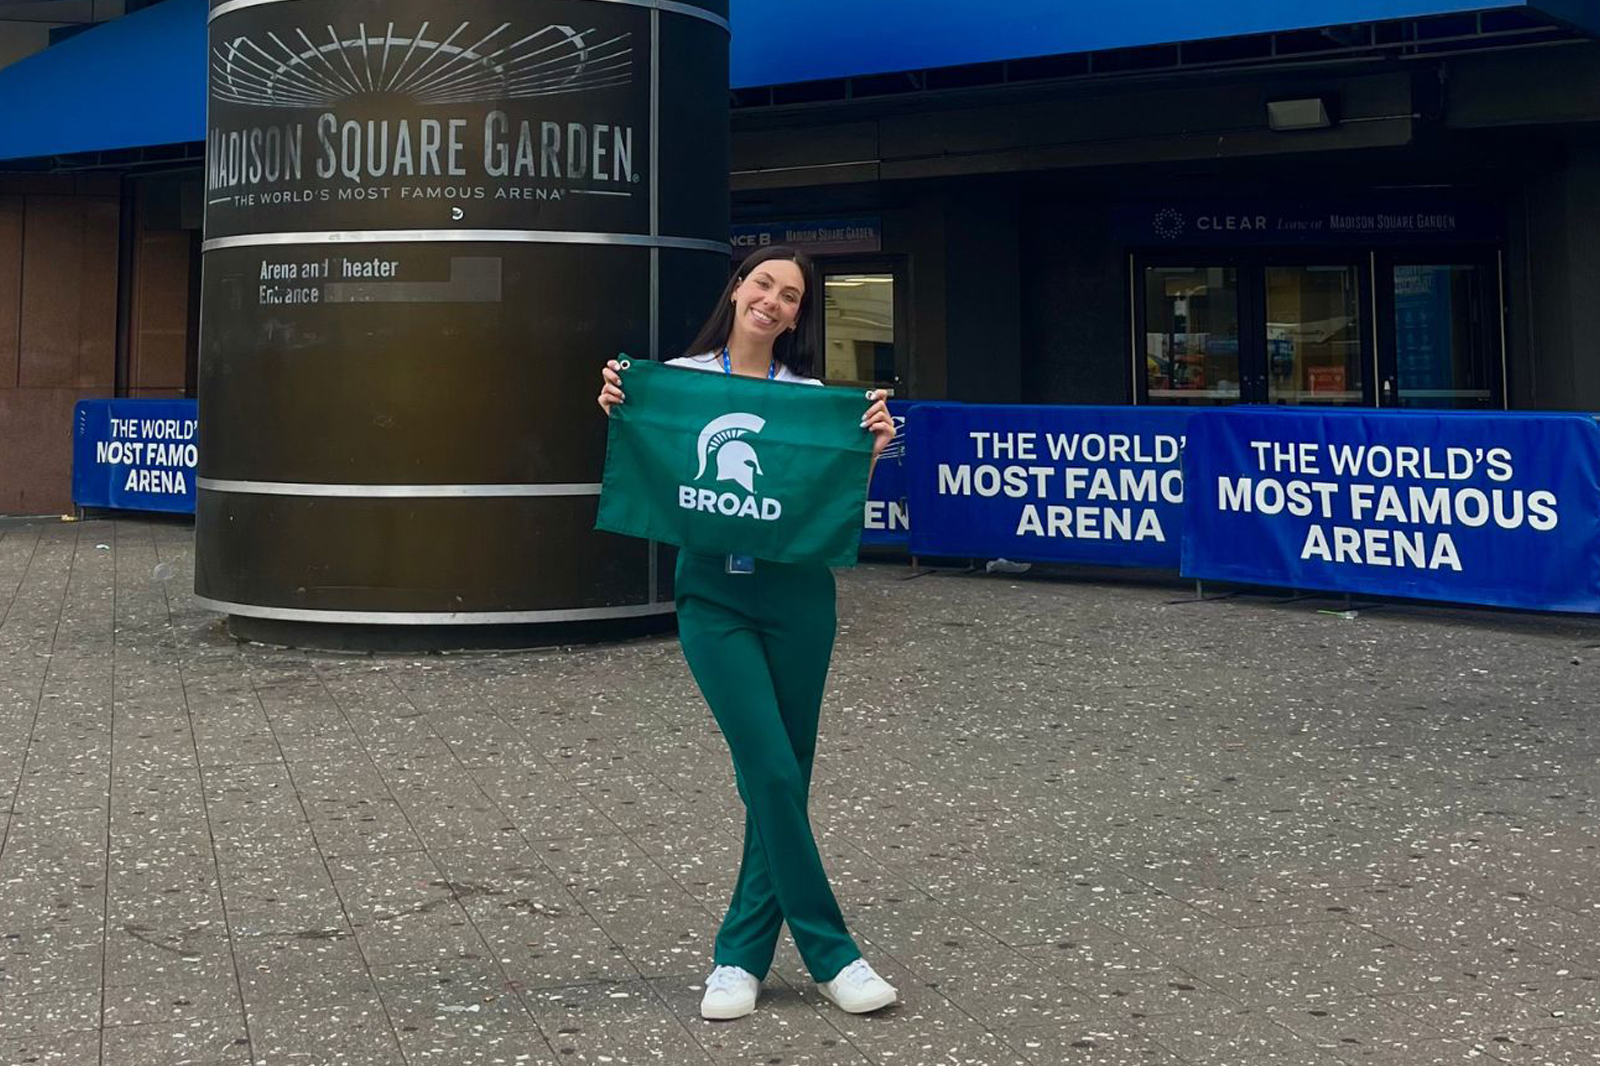 Maddison Rizzo holds a Broad flag outside the main entrance of Madison Square Garden during her 2023 internship experience.